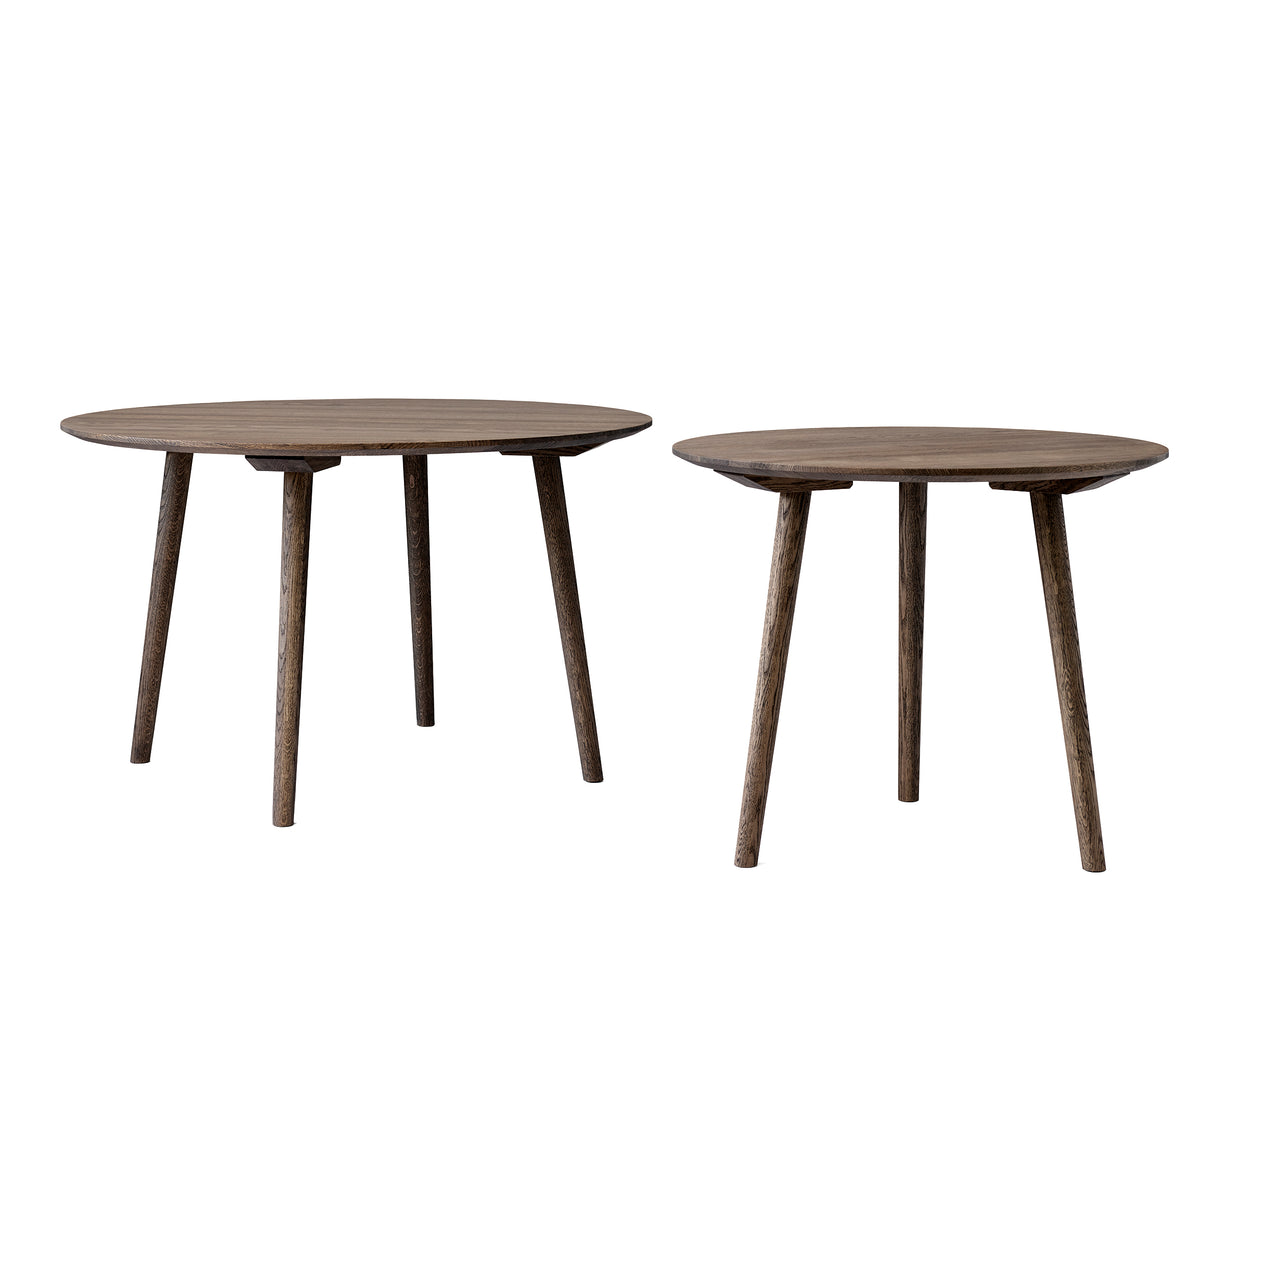 In Between Round Dining Table SK3 + SK4 + Large (SK4) - 47.2